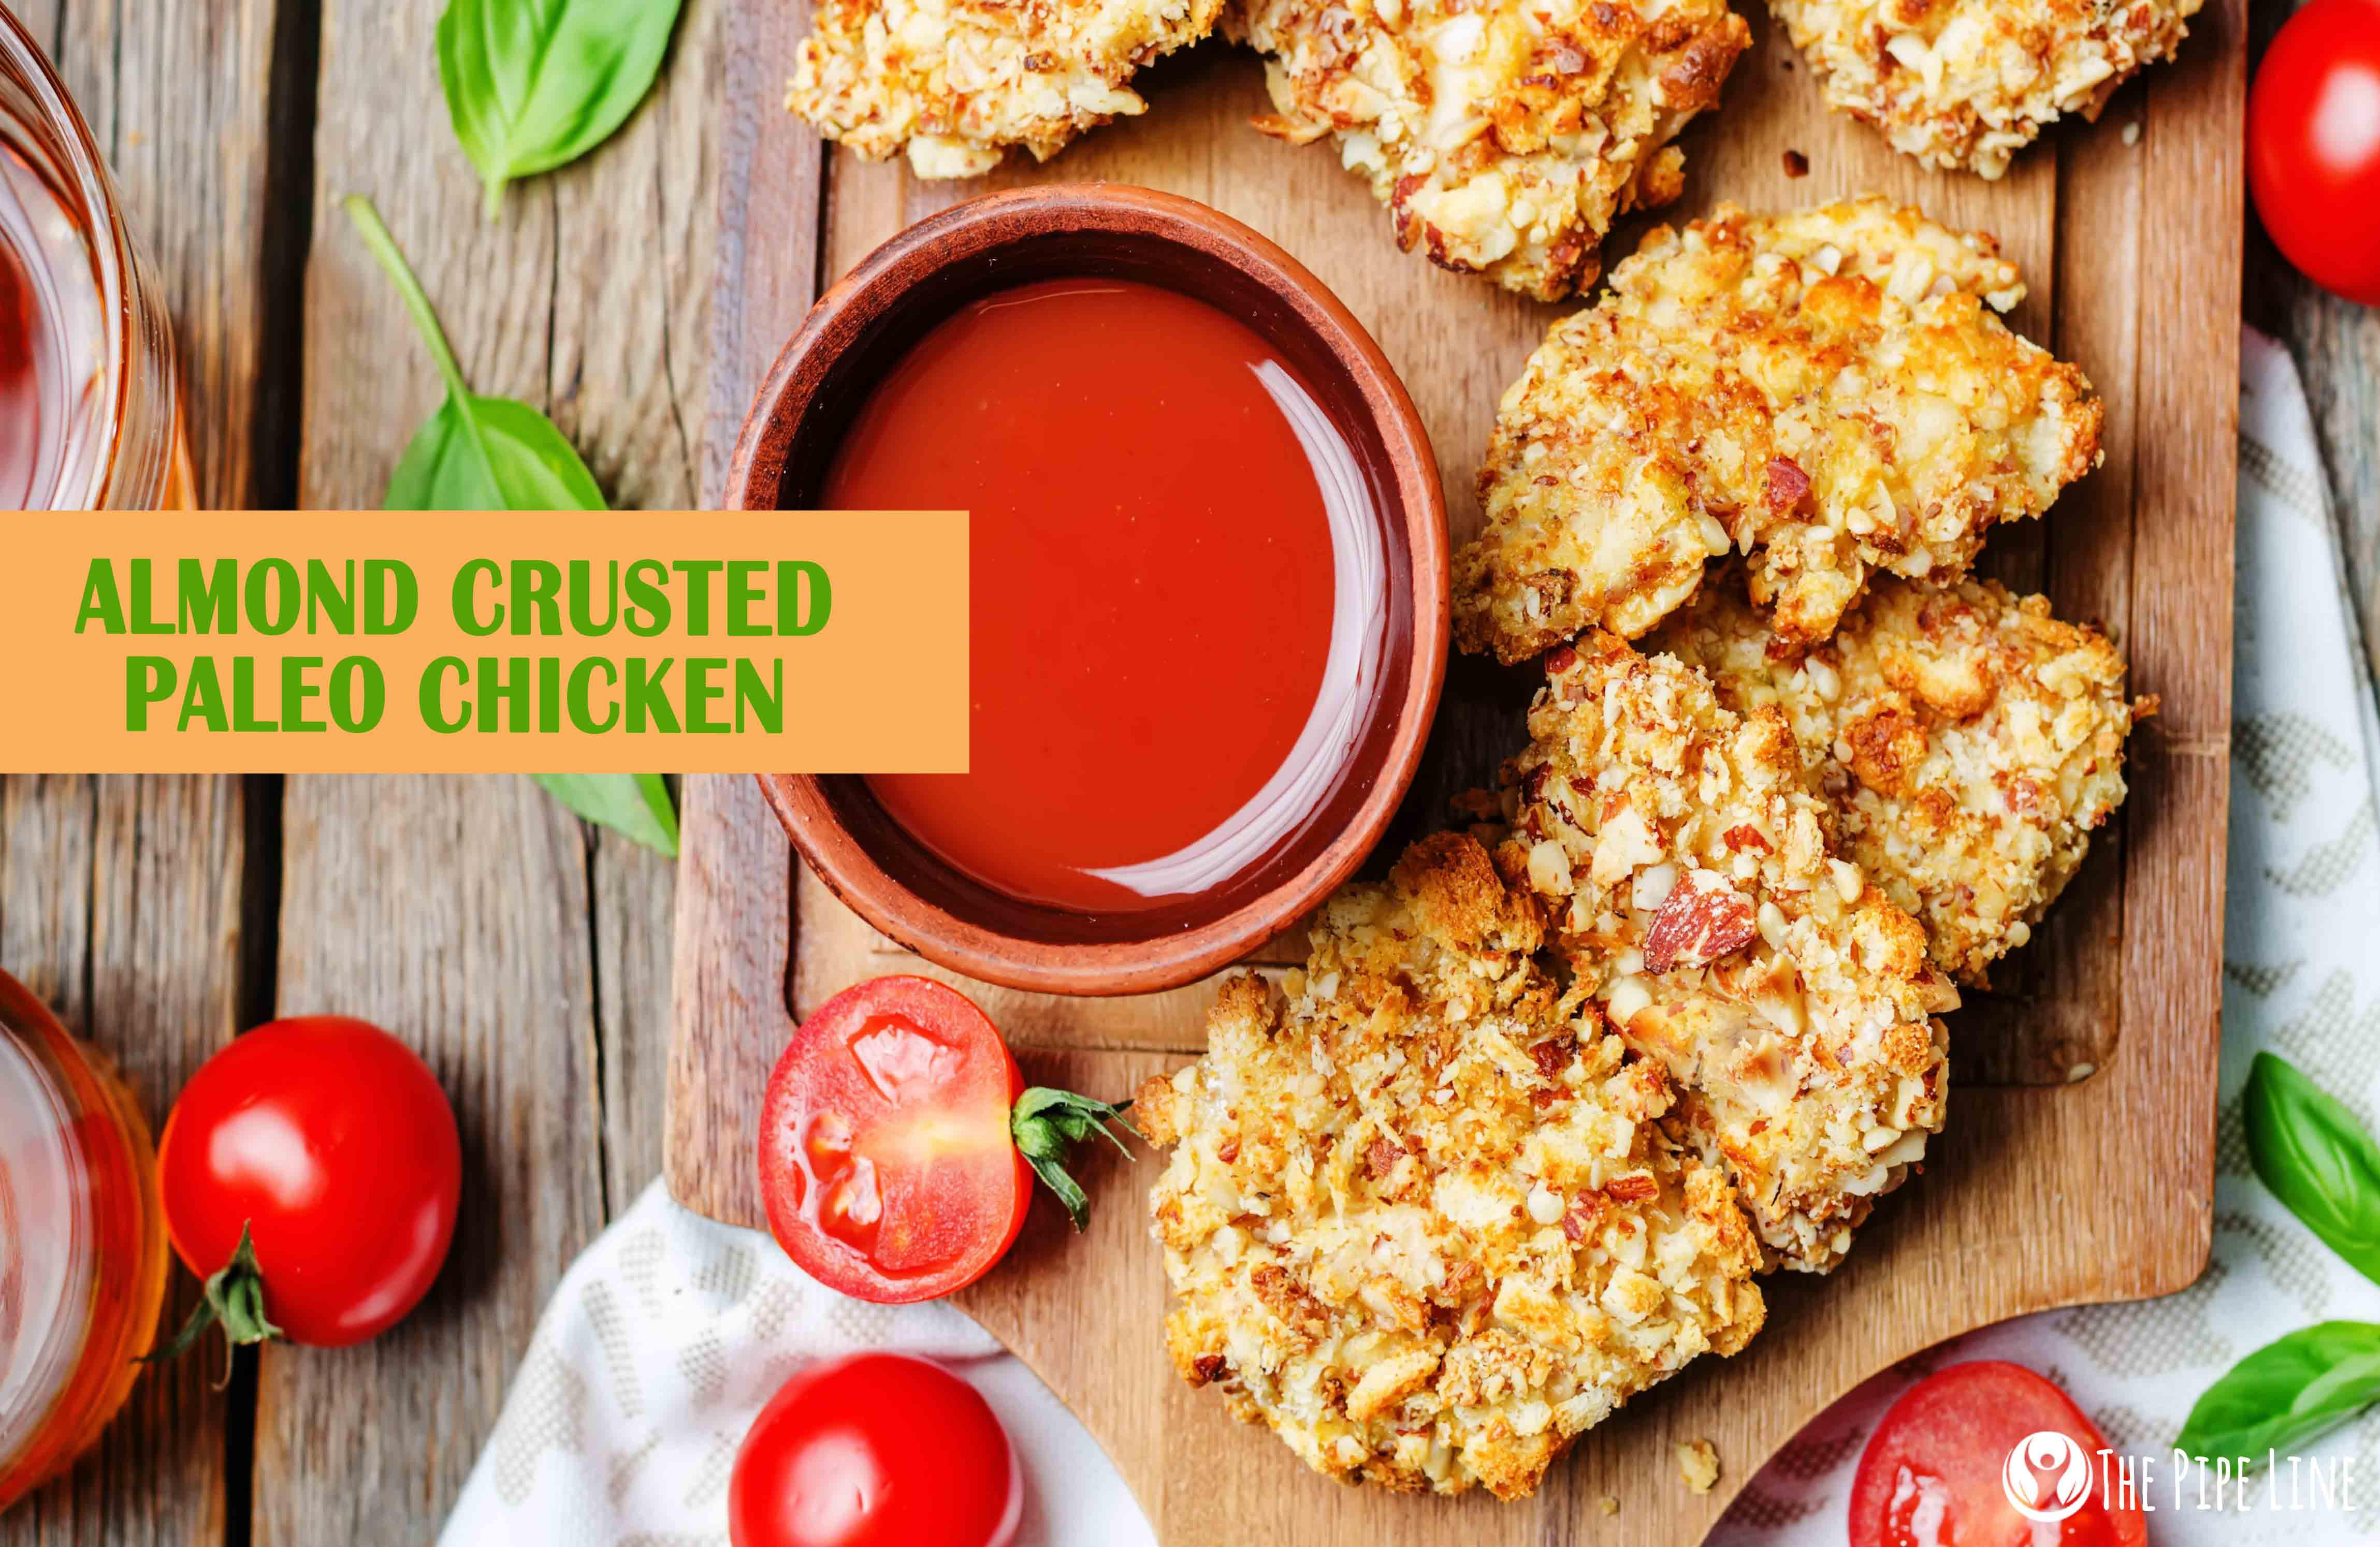 Need A Recipe Idea? Try This Almond Crusted Chicken Out!